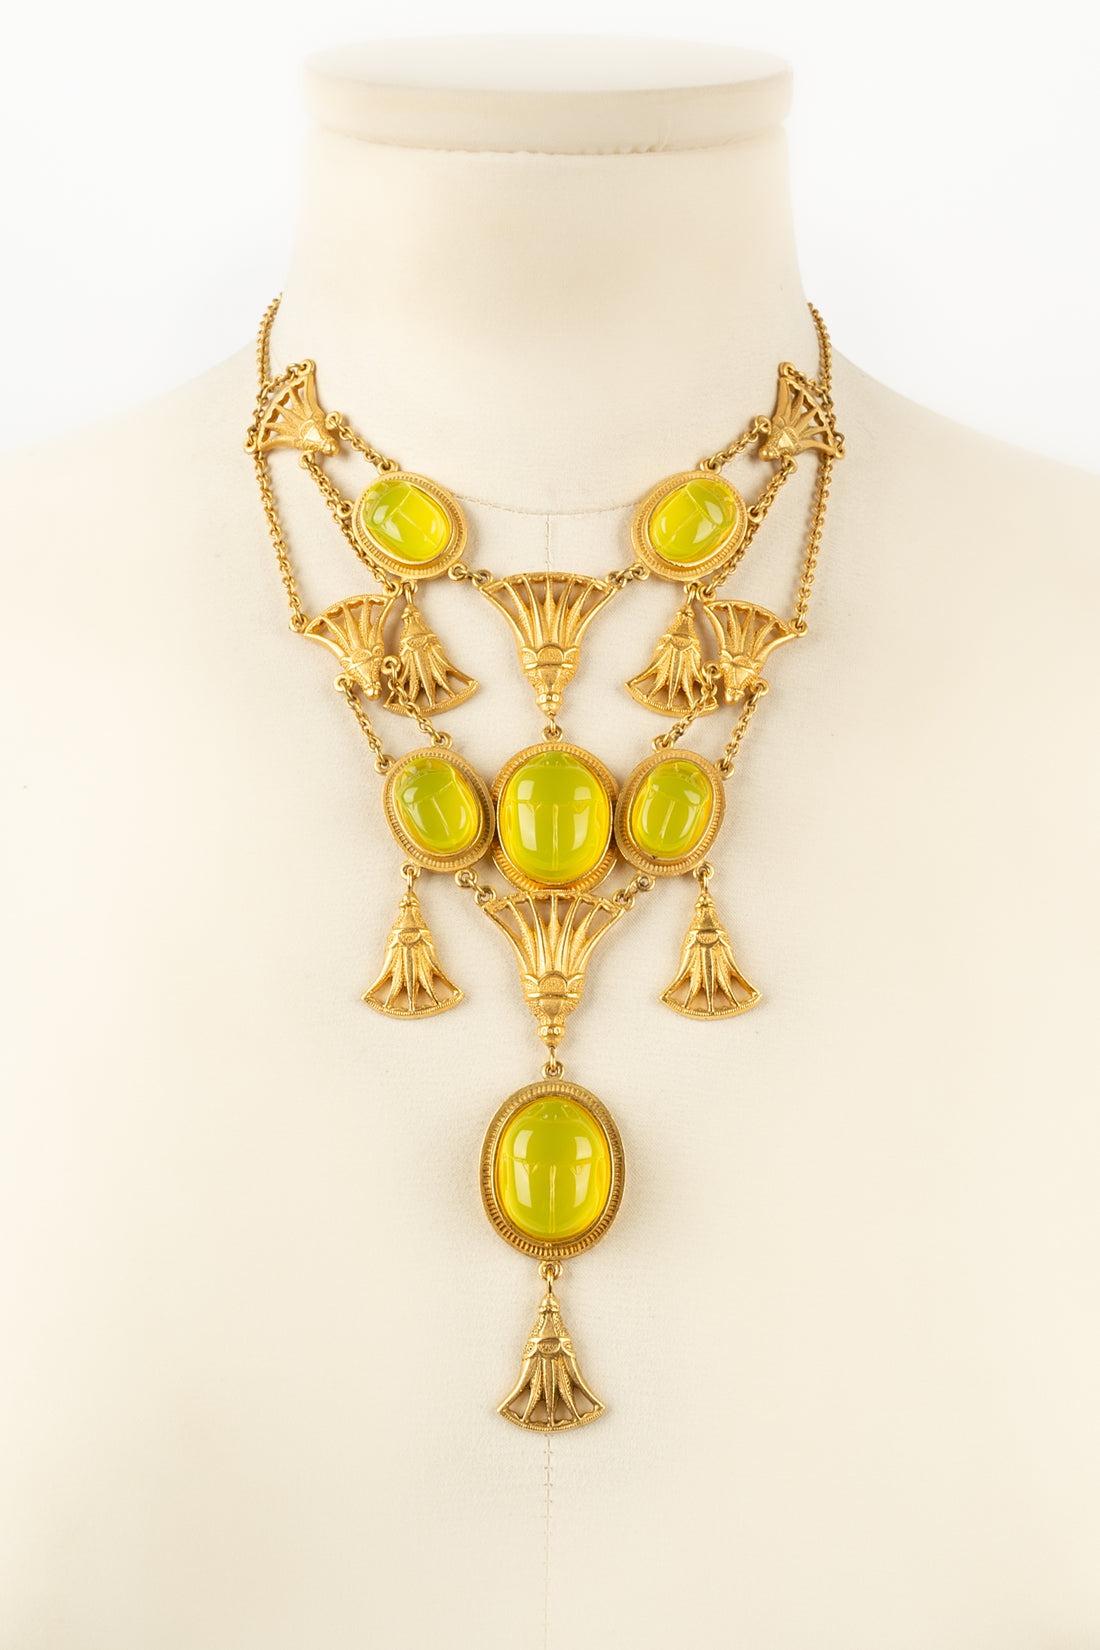 Christian Dior Necklace/Egyptian Jewelry, 2004 For Sale 10